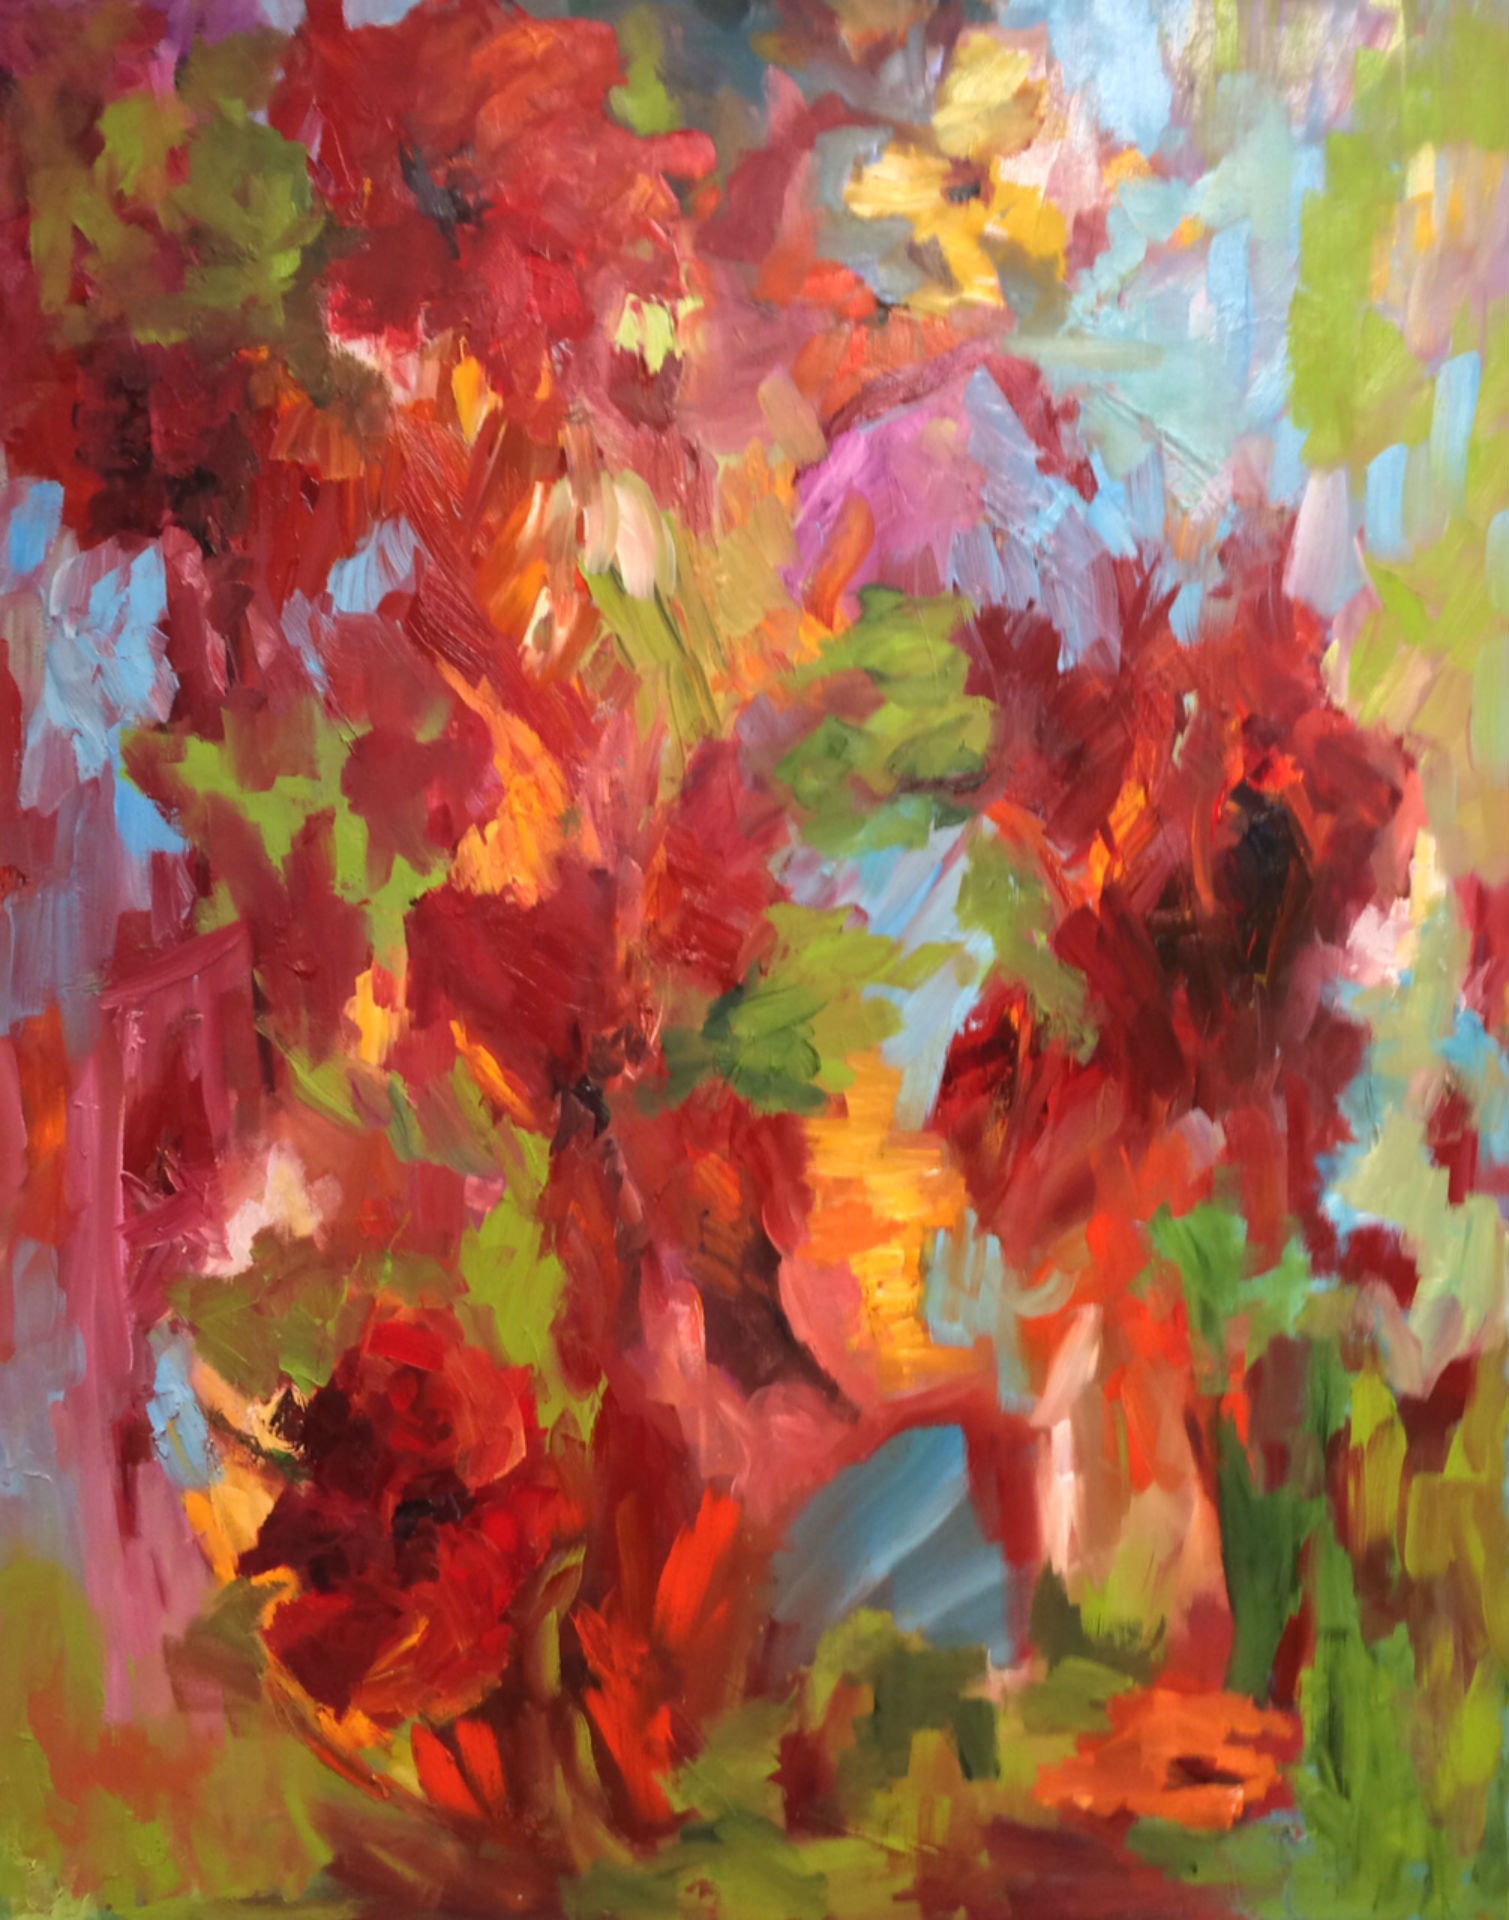 Morning Garden, oil on canvas, 60"x48" SOLD